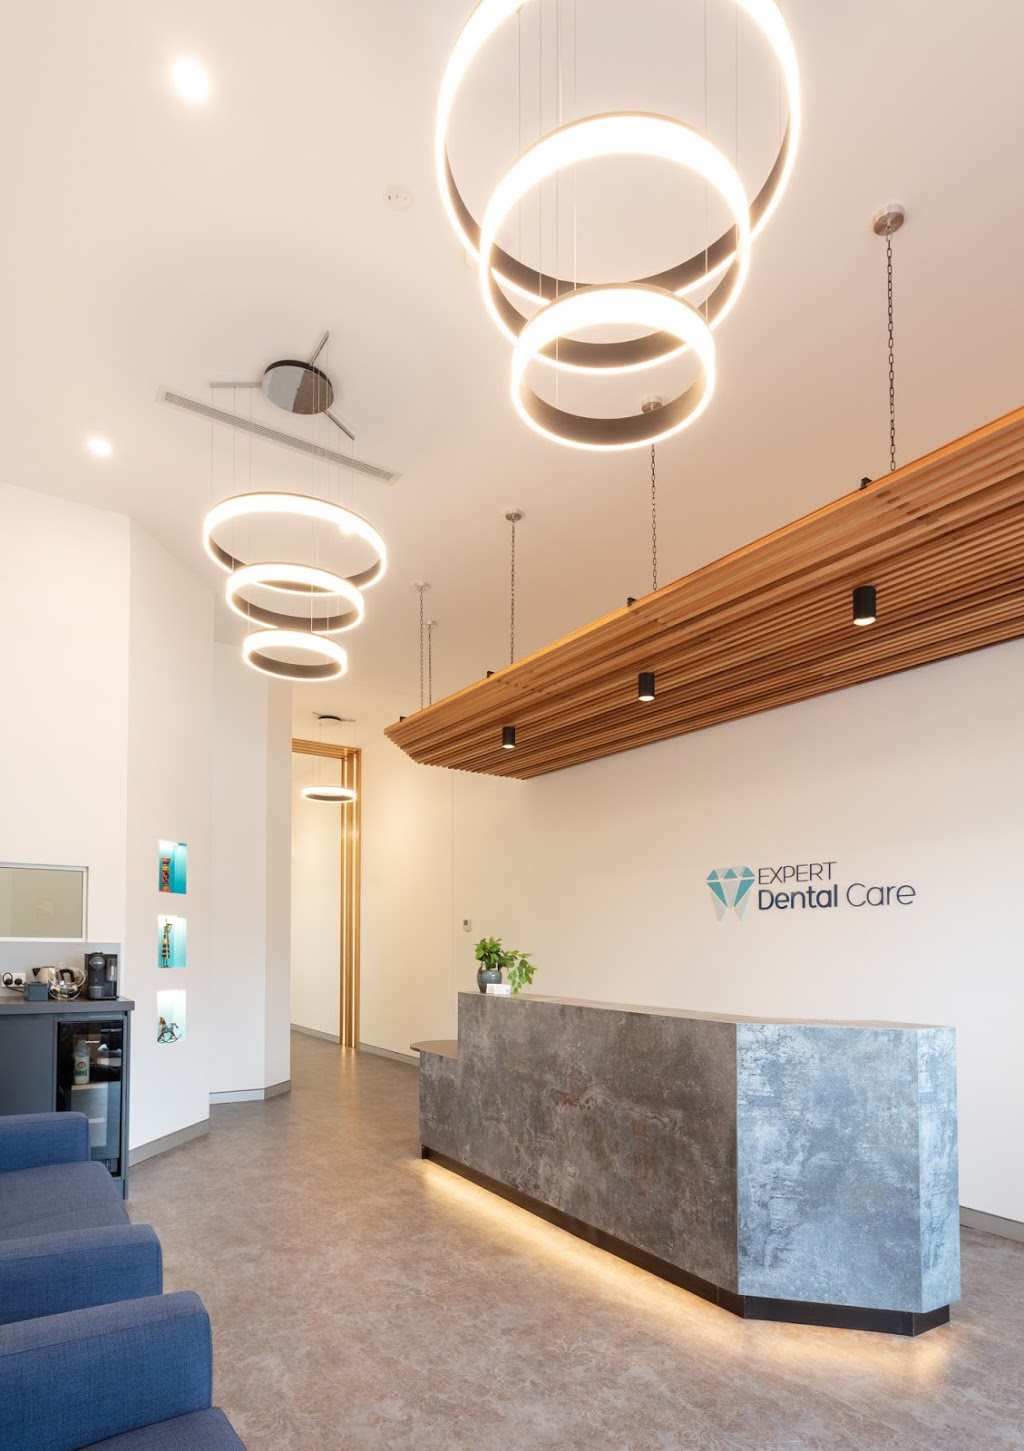 Expert Dental Care | dentist | 5a/633-639 Hume Hwy, Casula NSW 2170, Australia | 0291593839 OR +61 2 9159 3839